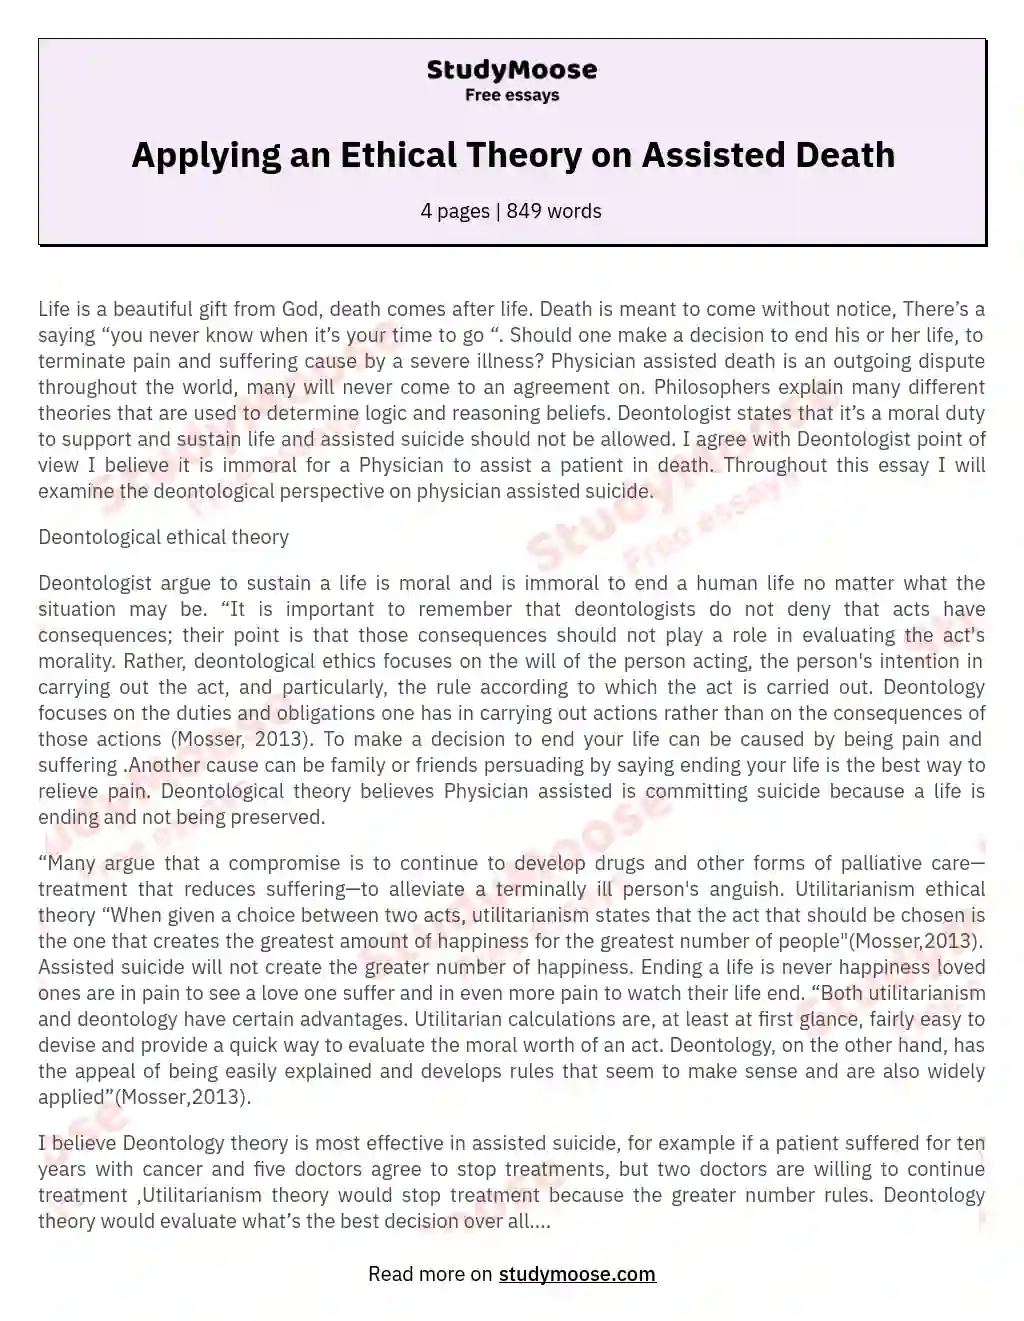 Applying an Ethical Theory on Assisted Death